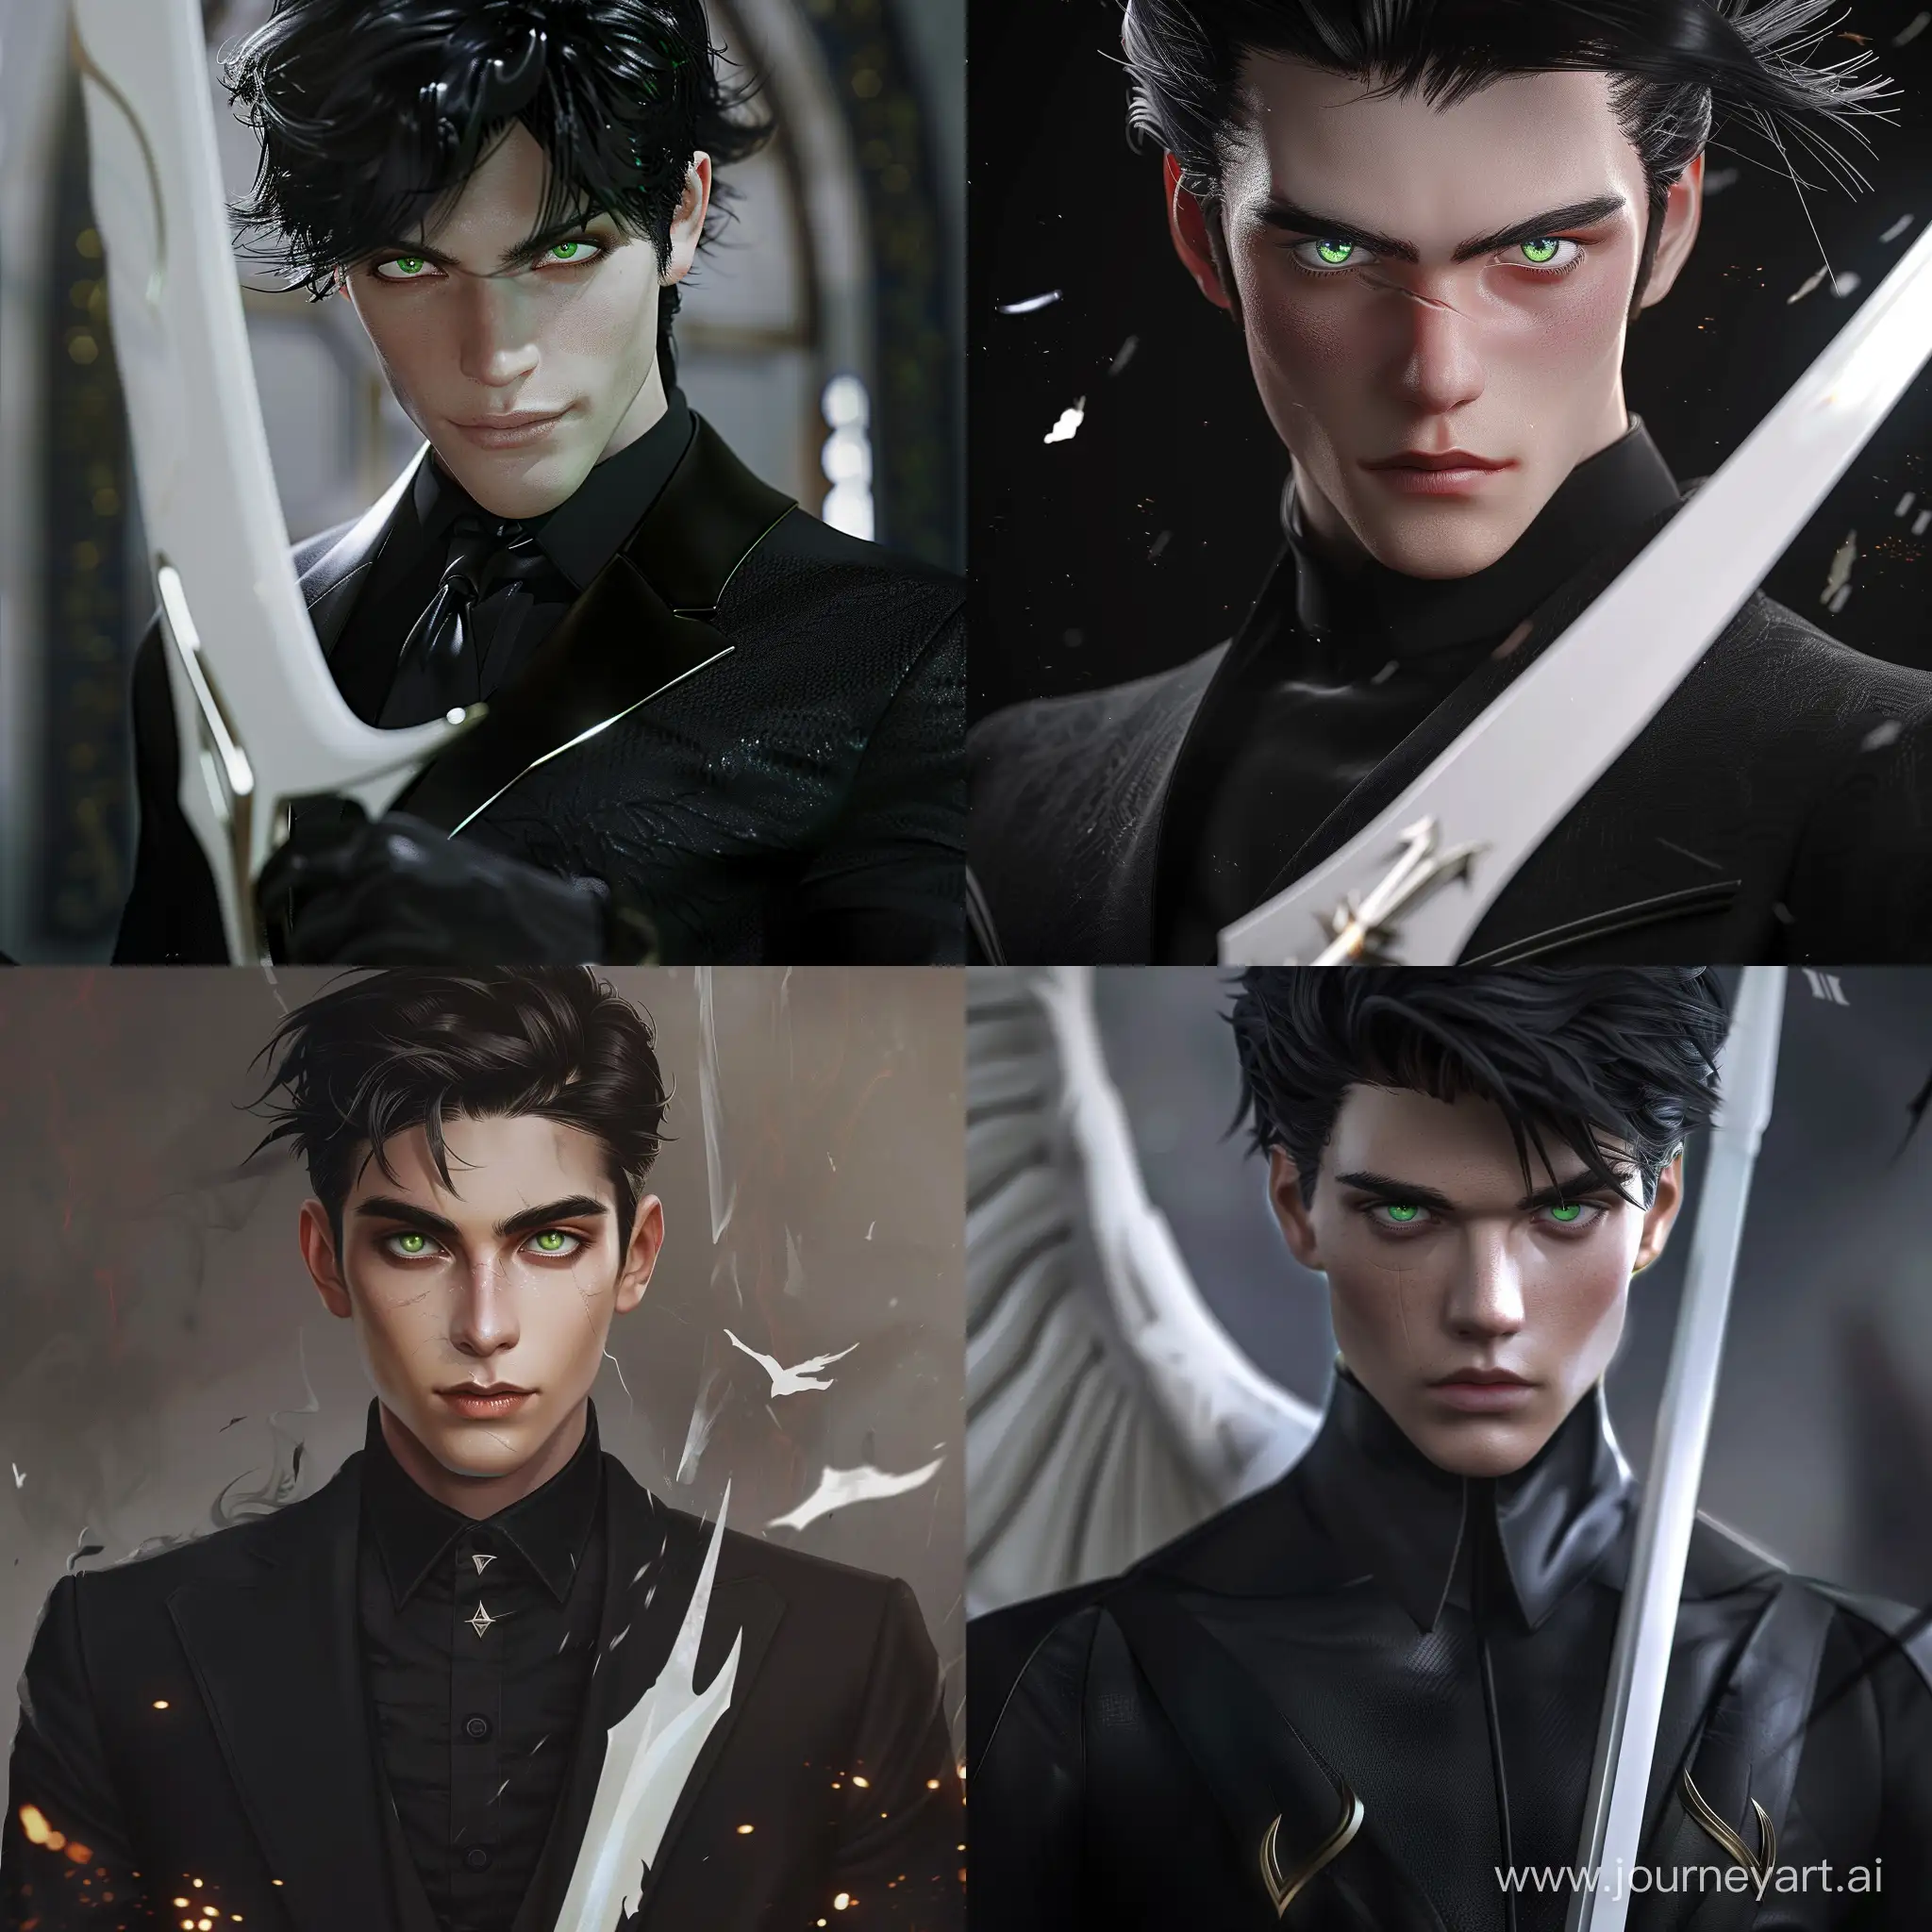 Mystical-Elegance-Handsome-Man-in-Black-Suit-Wielding-White-Magic-Weapon